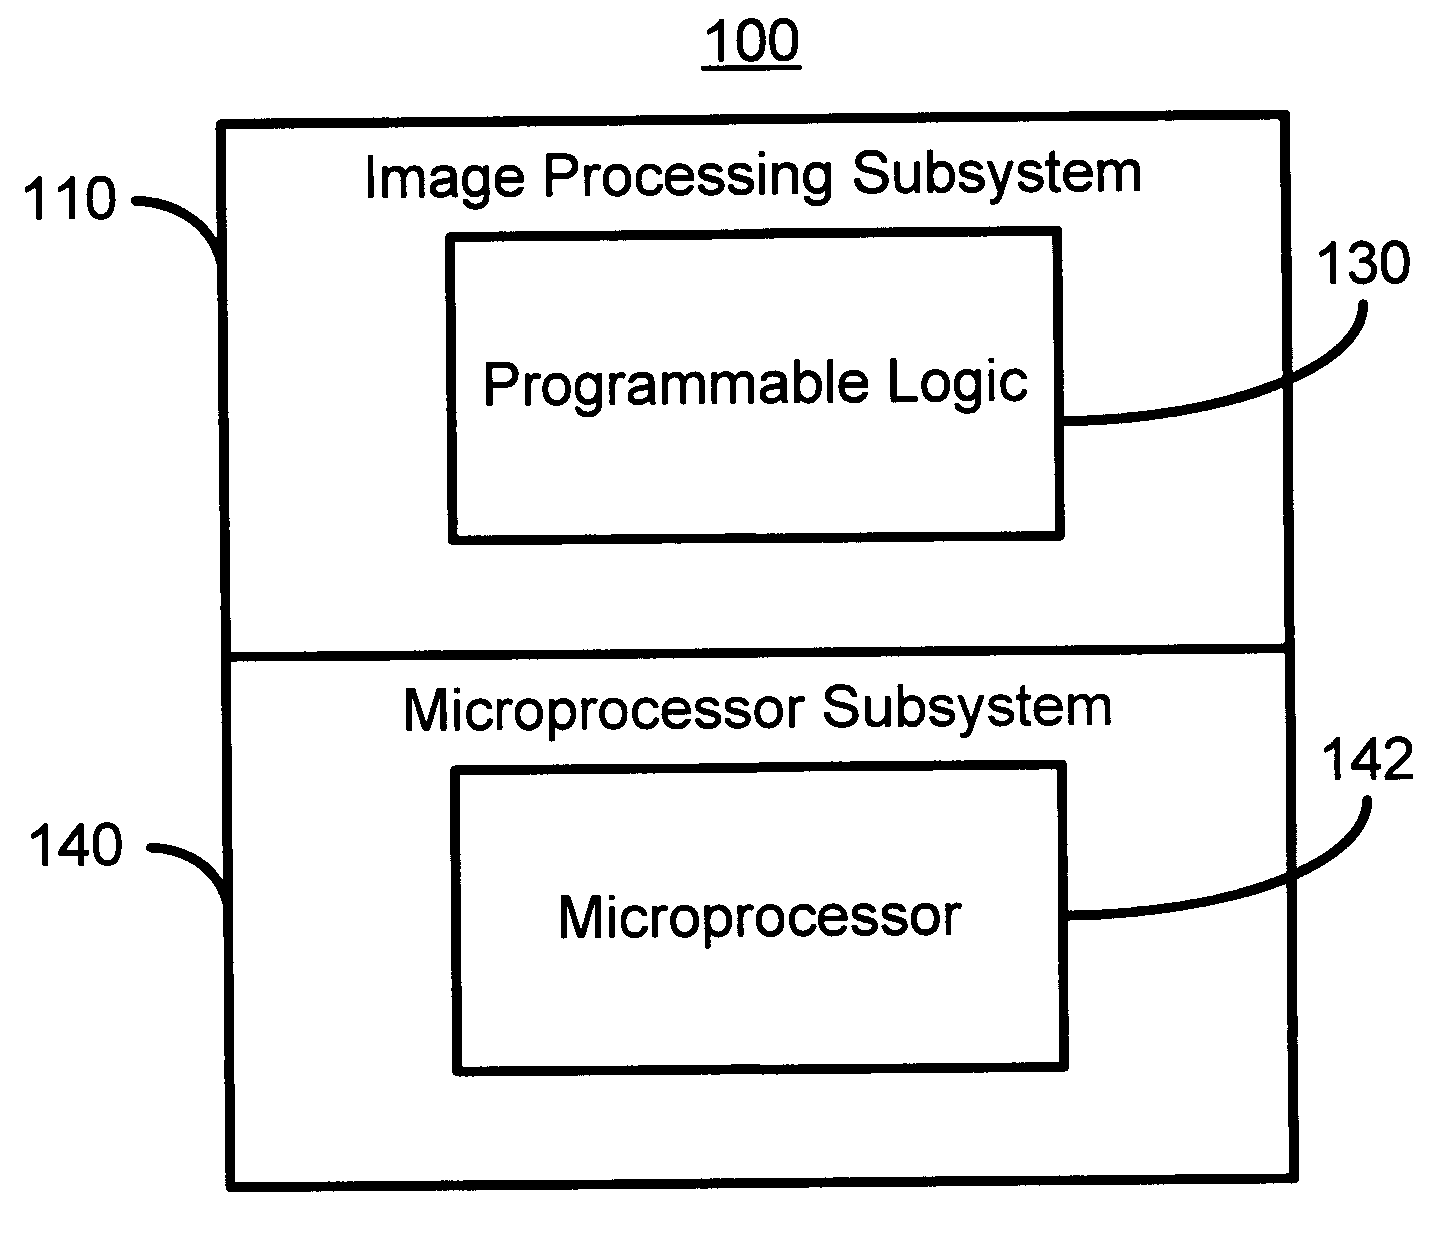 Embedded metal-programmable image processing array for digital still camera and camrecorder products